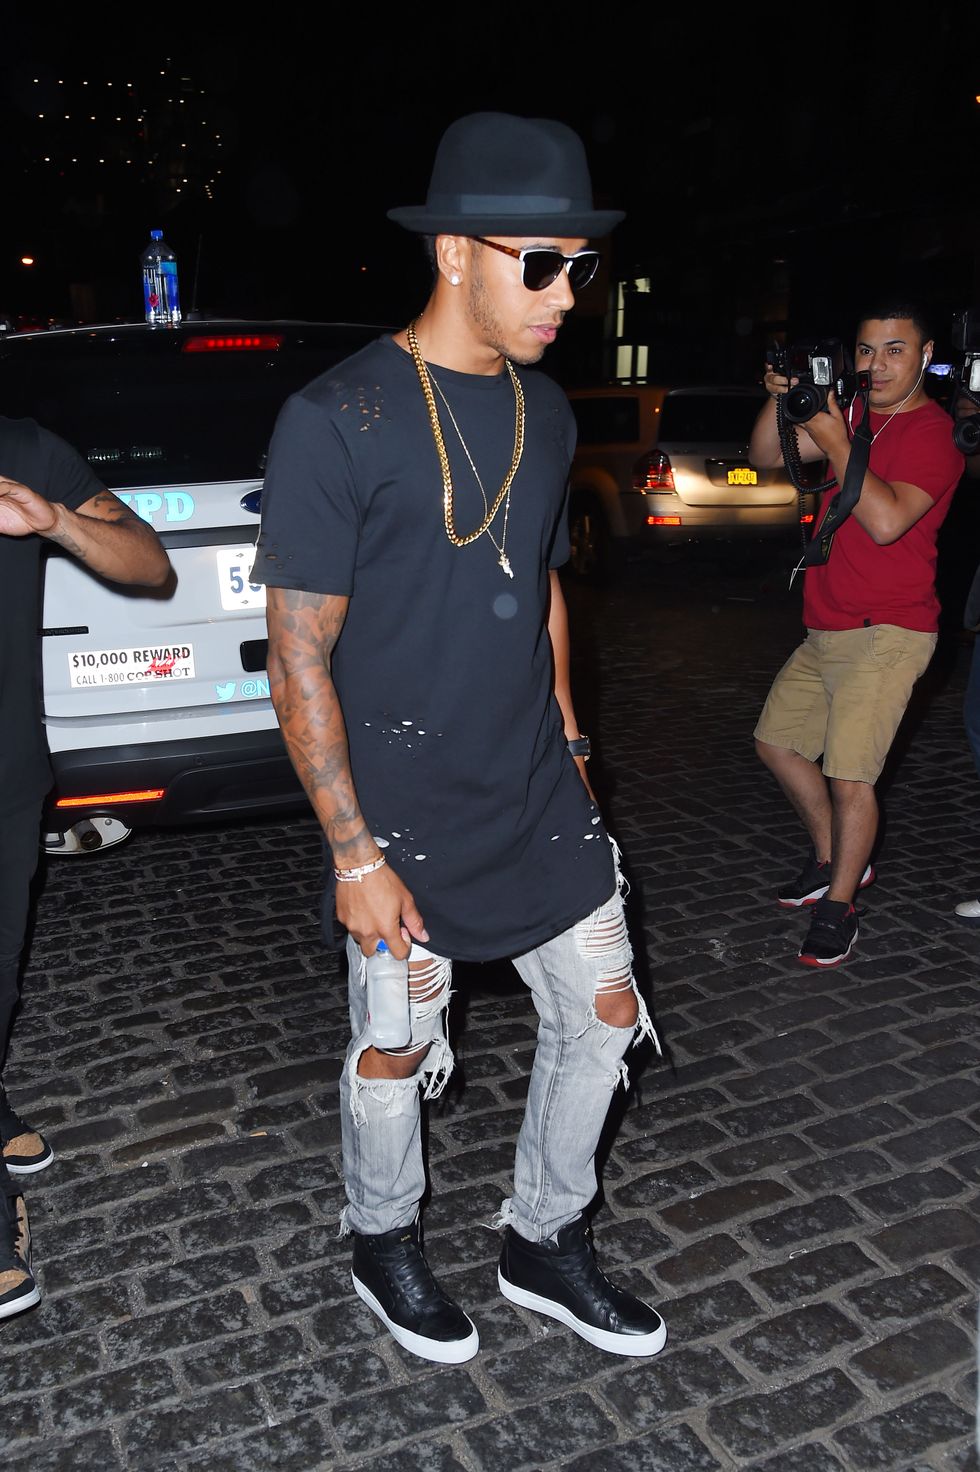 Lewis Hamilton went clubbing with Rihanna wearing ripped jeans, a black T-shirt, and a fancy hat